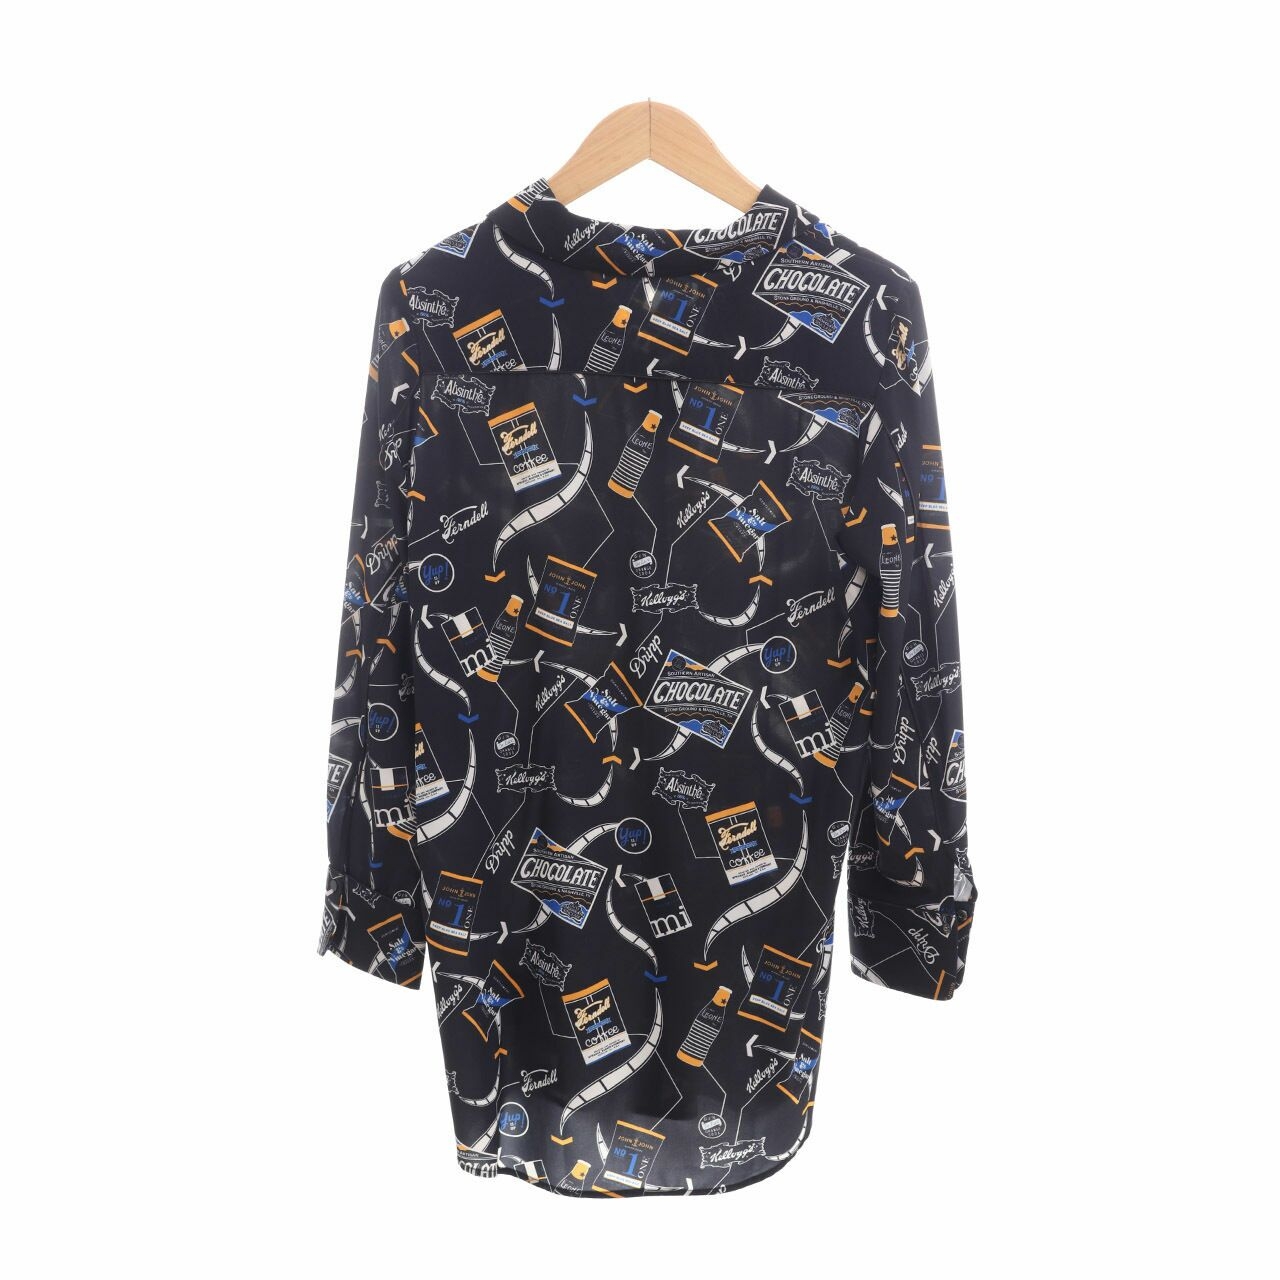 Lily Black Printed Blouse